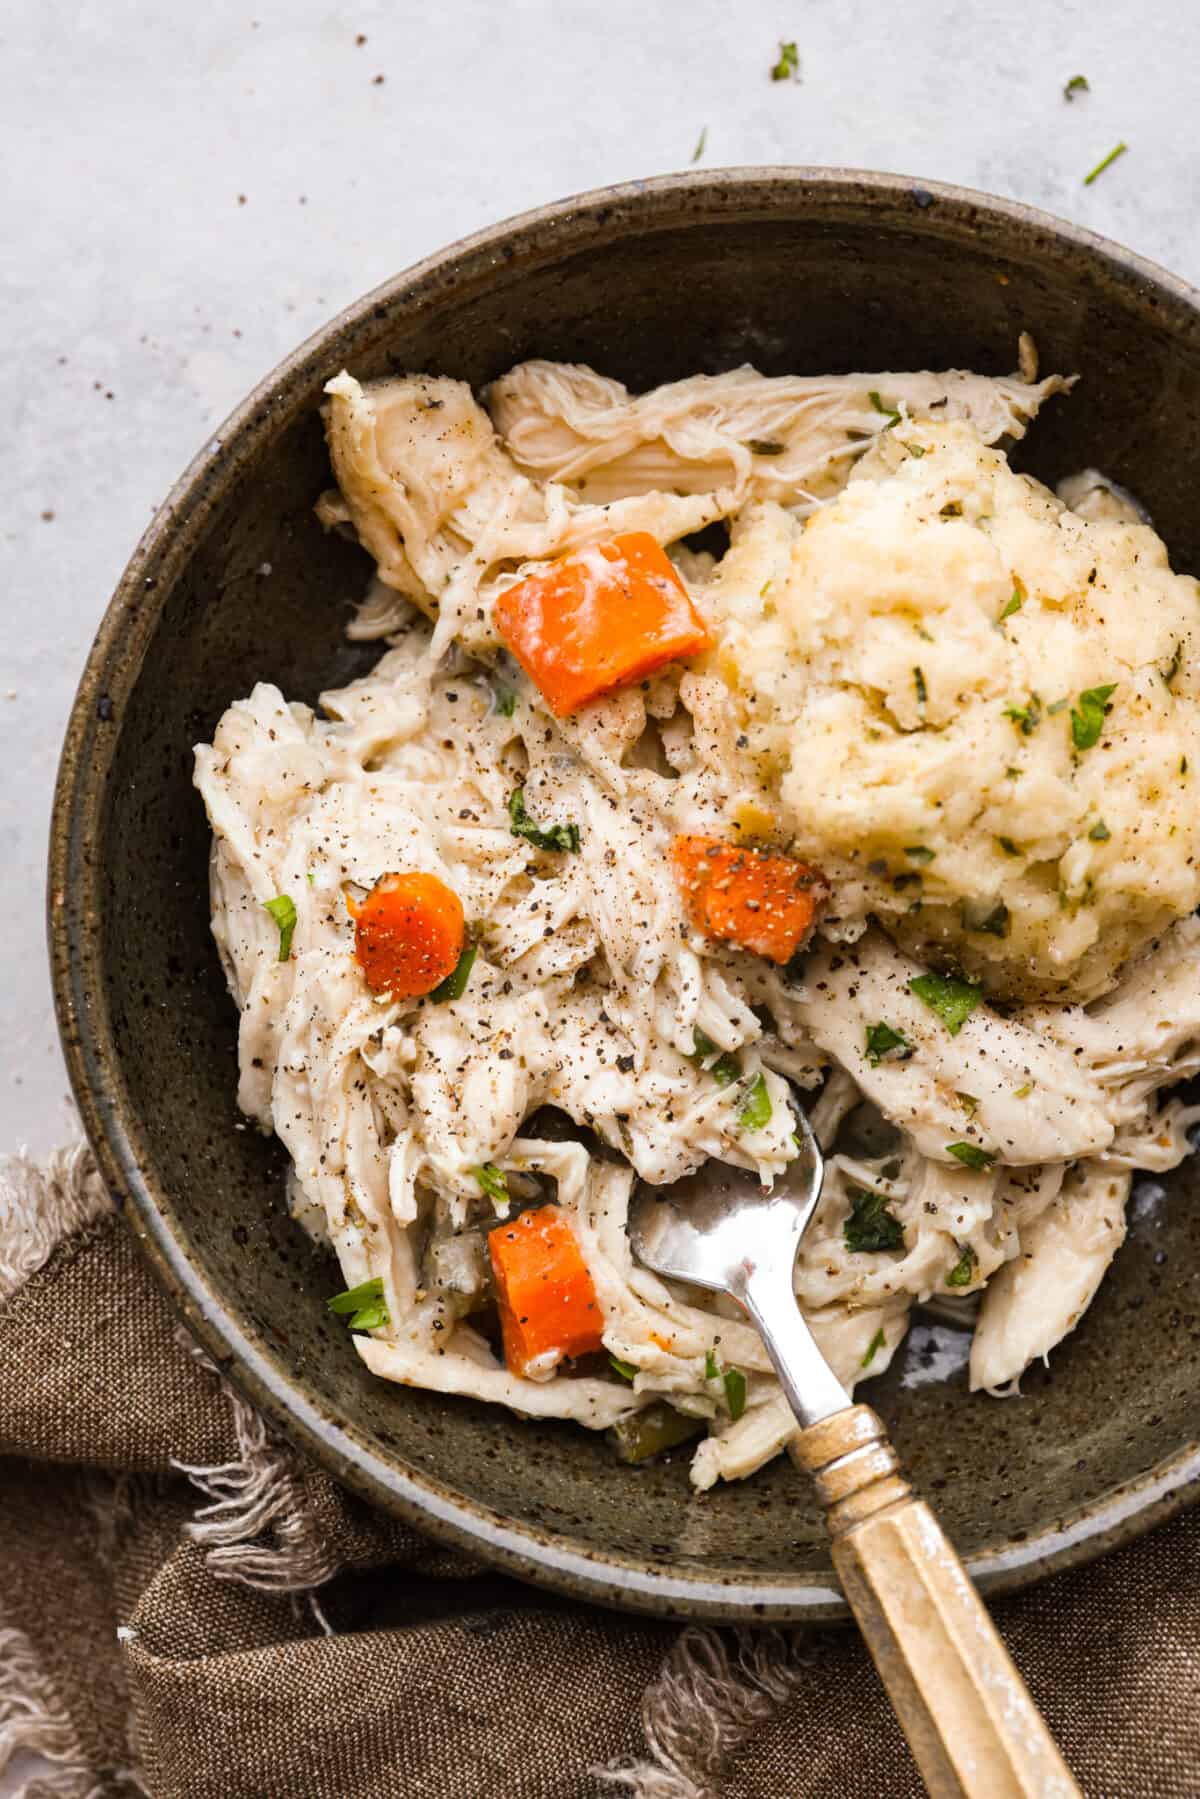 Chicken and dumplings in a brown bowl with a fork.